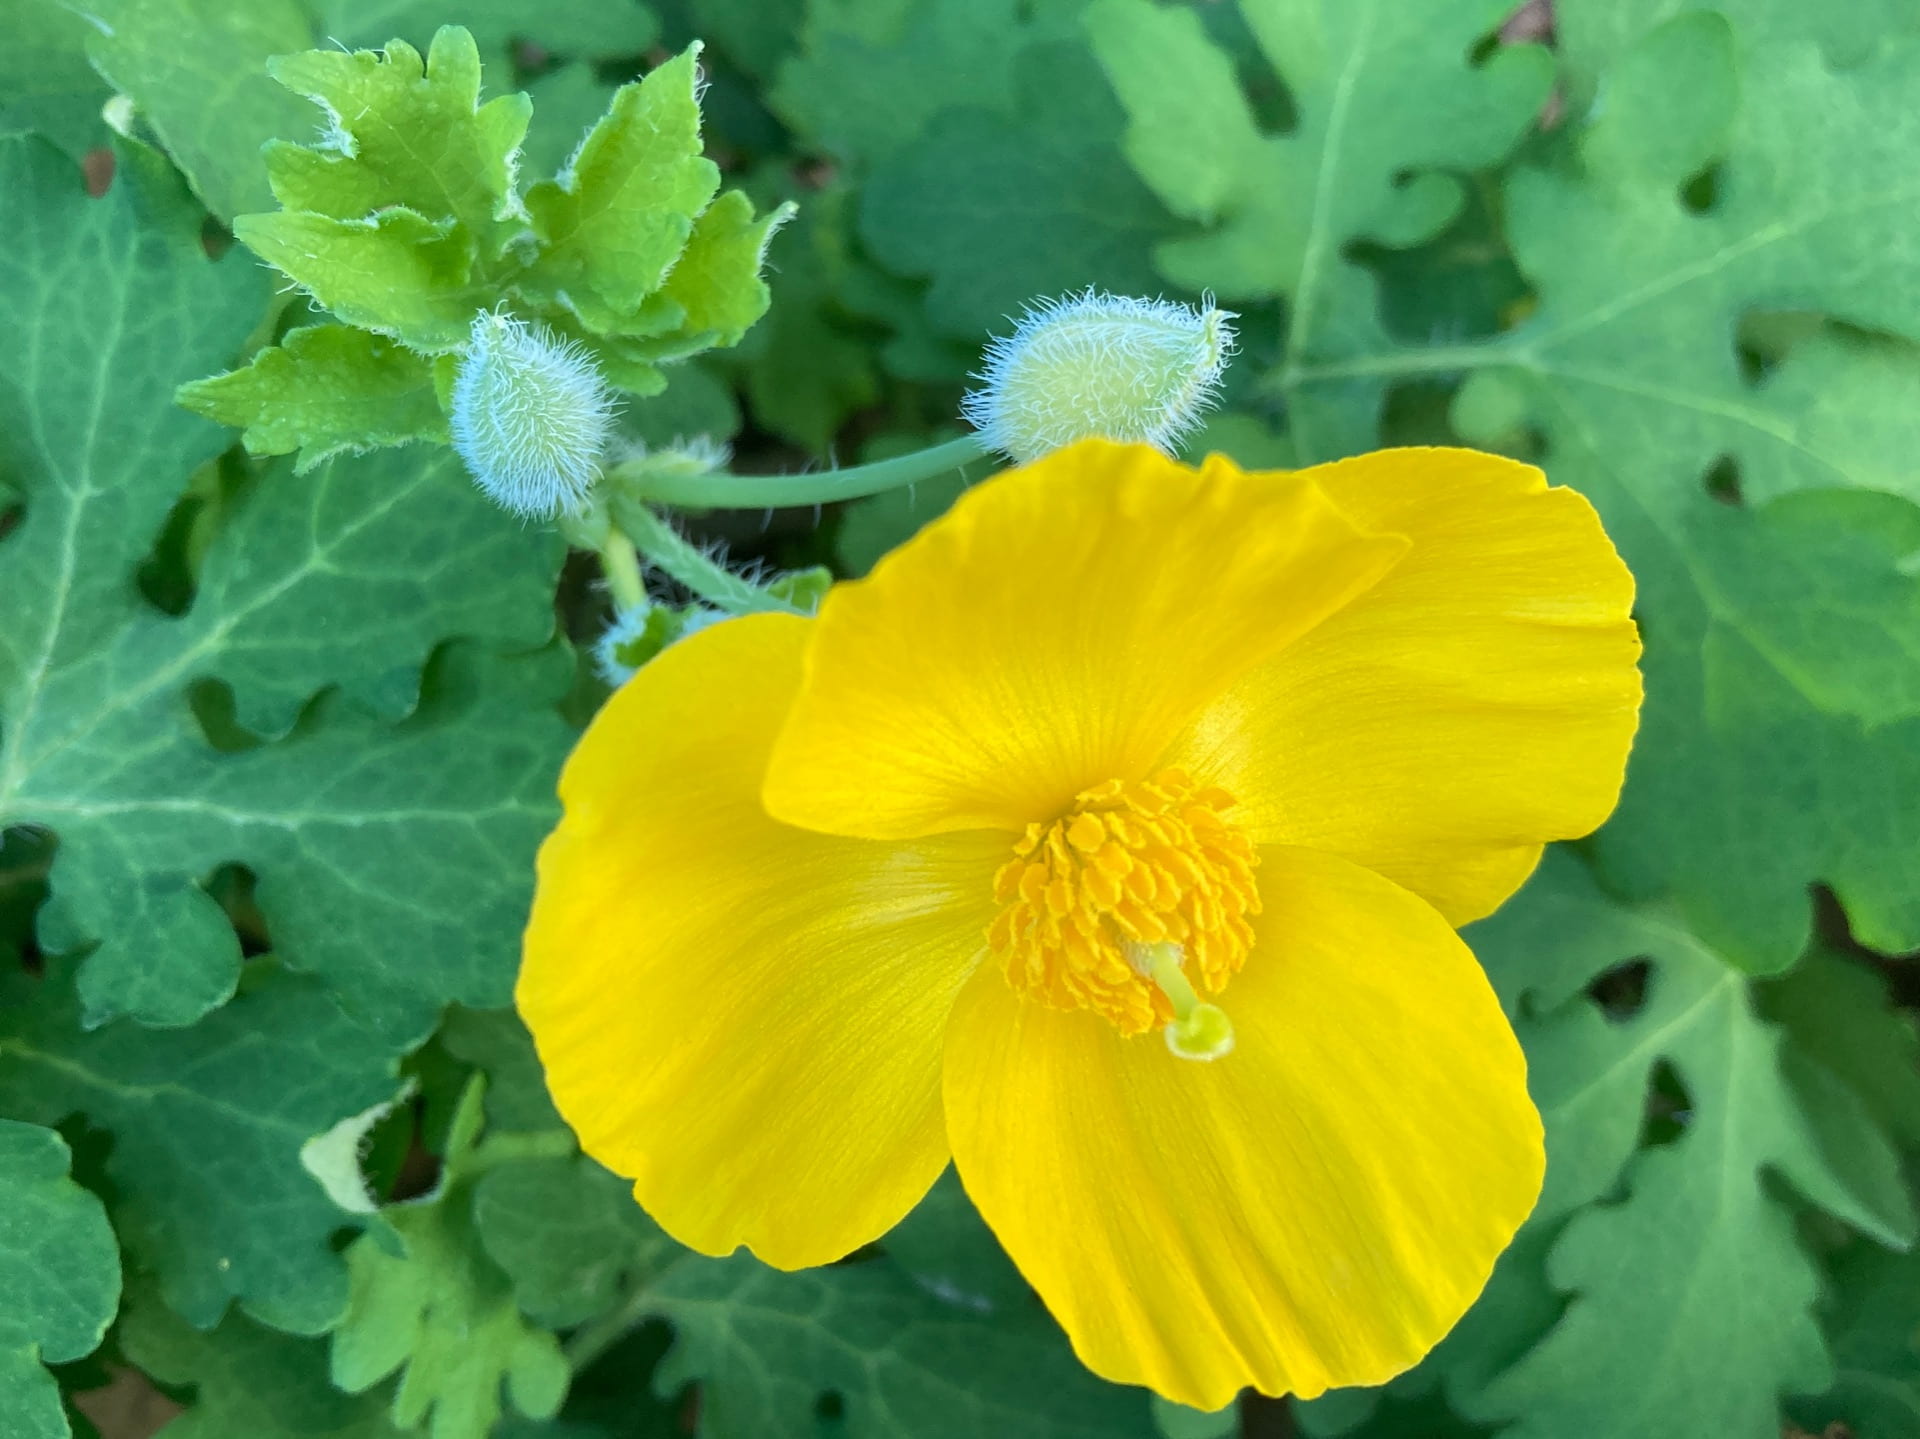 Bright yellow flowers of the woods-poppy, Stylophorum diphyllum, lights up any shady planting.